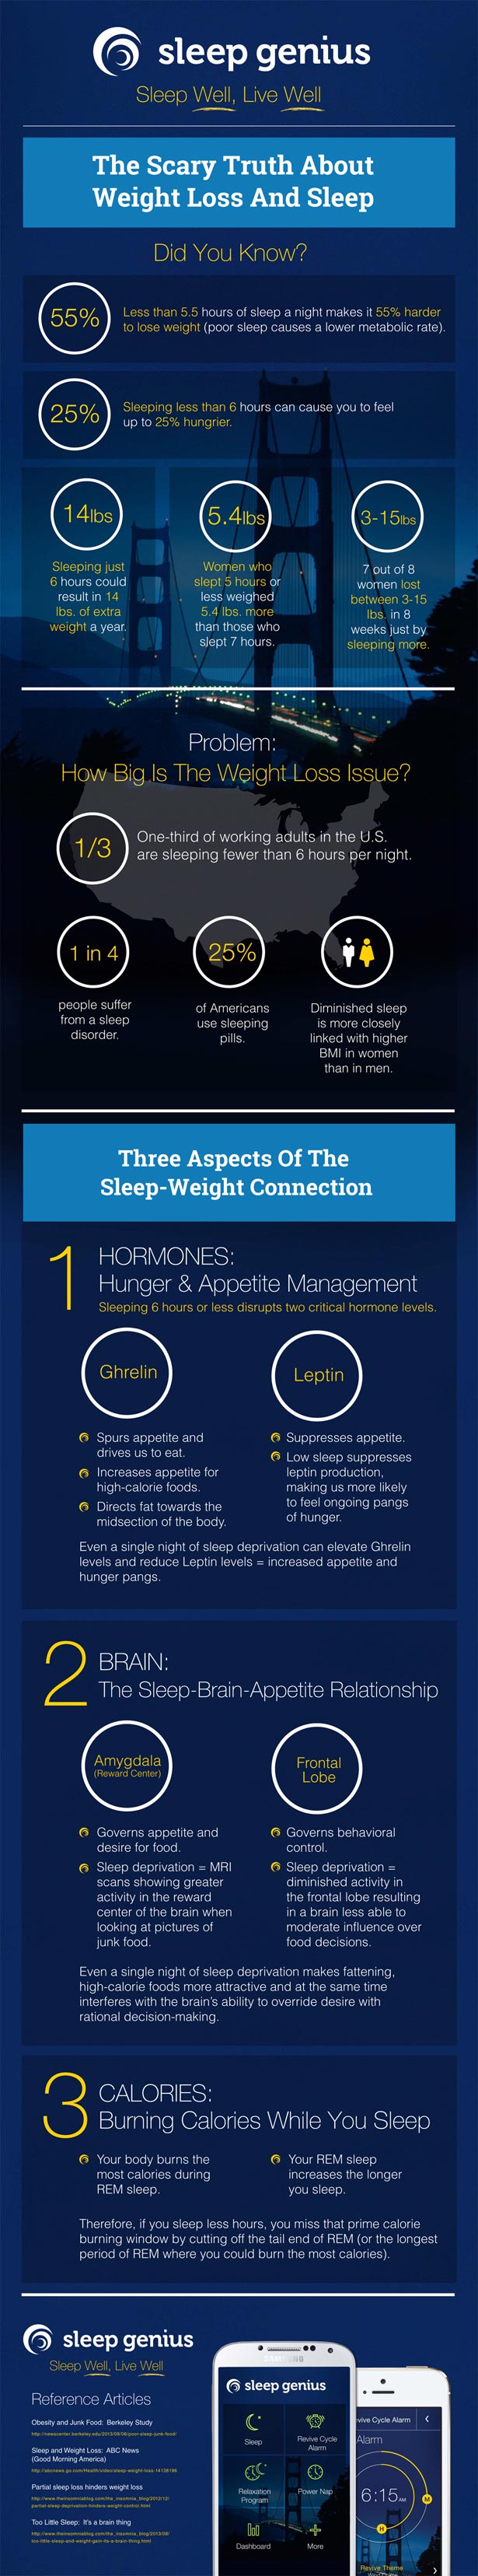 infographic about sleep and weight loss